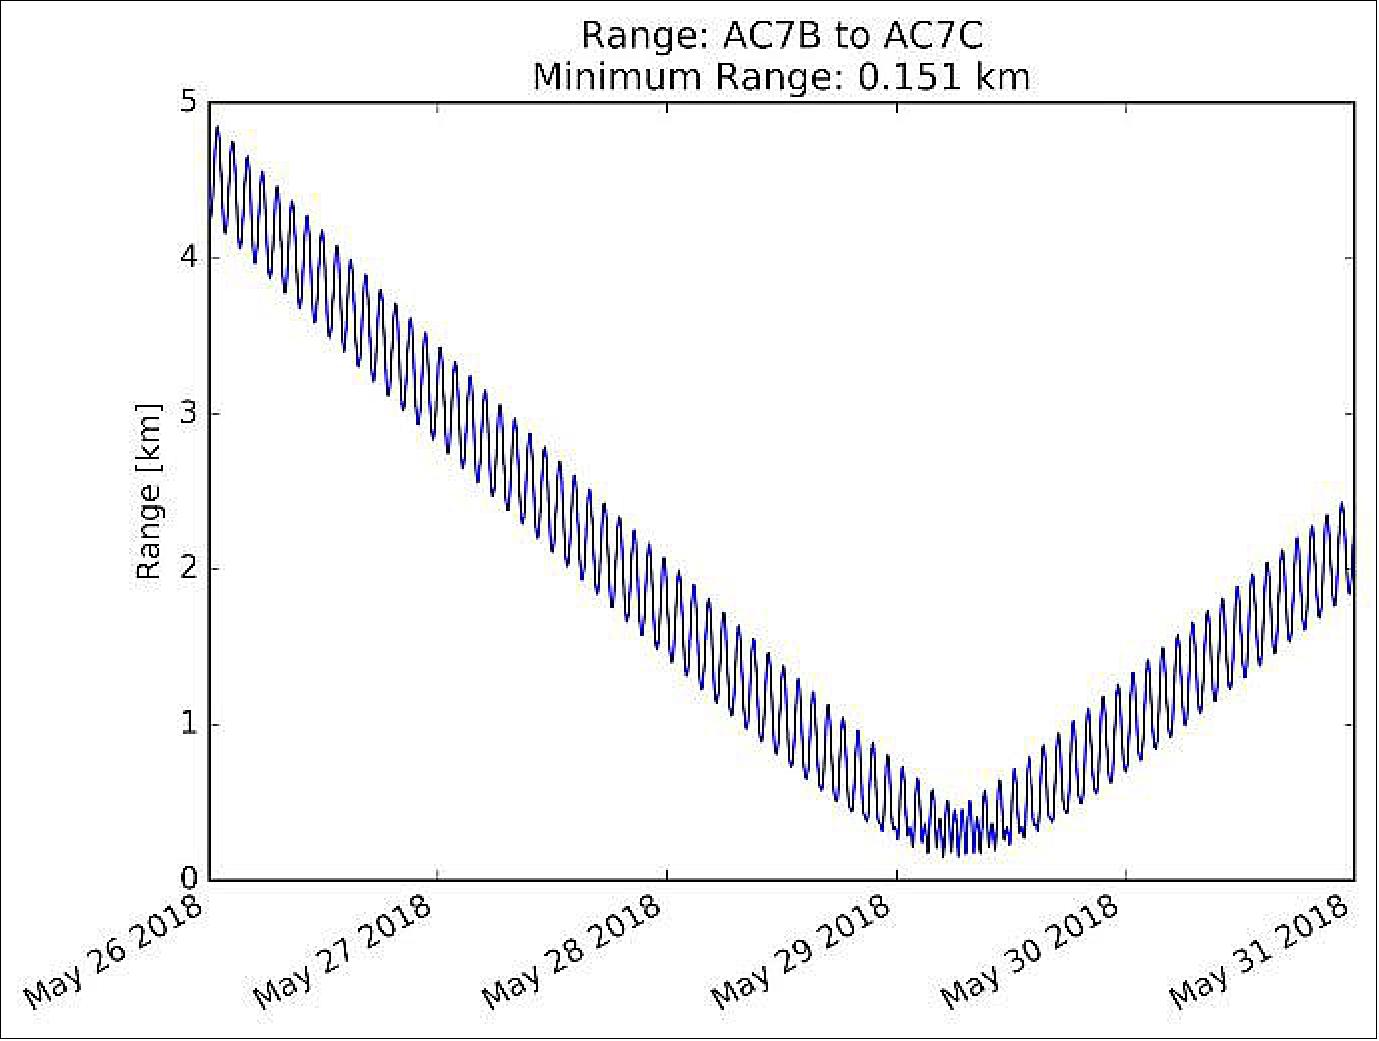 Figure 14: Range between AeroCube-OCSD-B and -C based on GPS-derived orbital elements obtained during the encounter phase (image credit: The Aerospace Corporation)